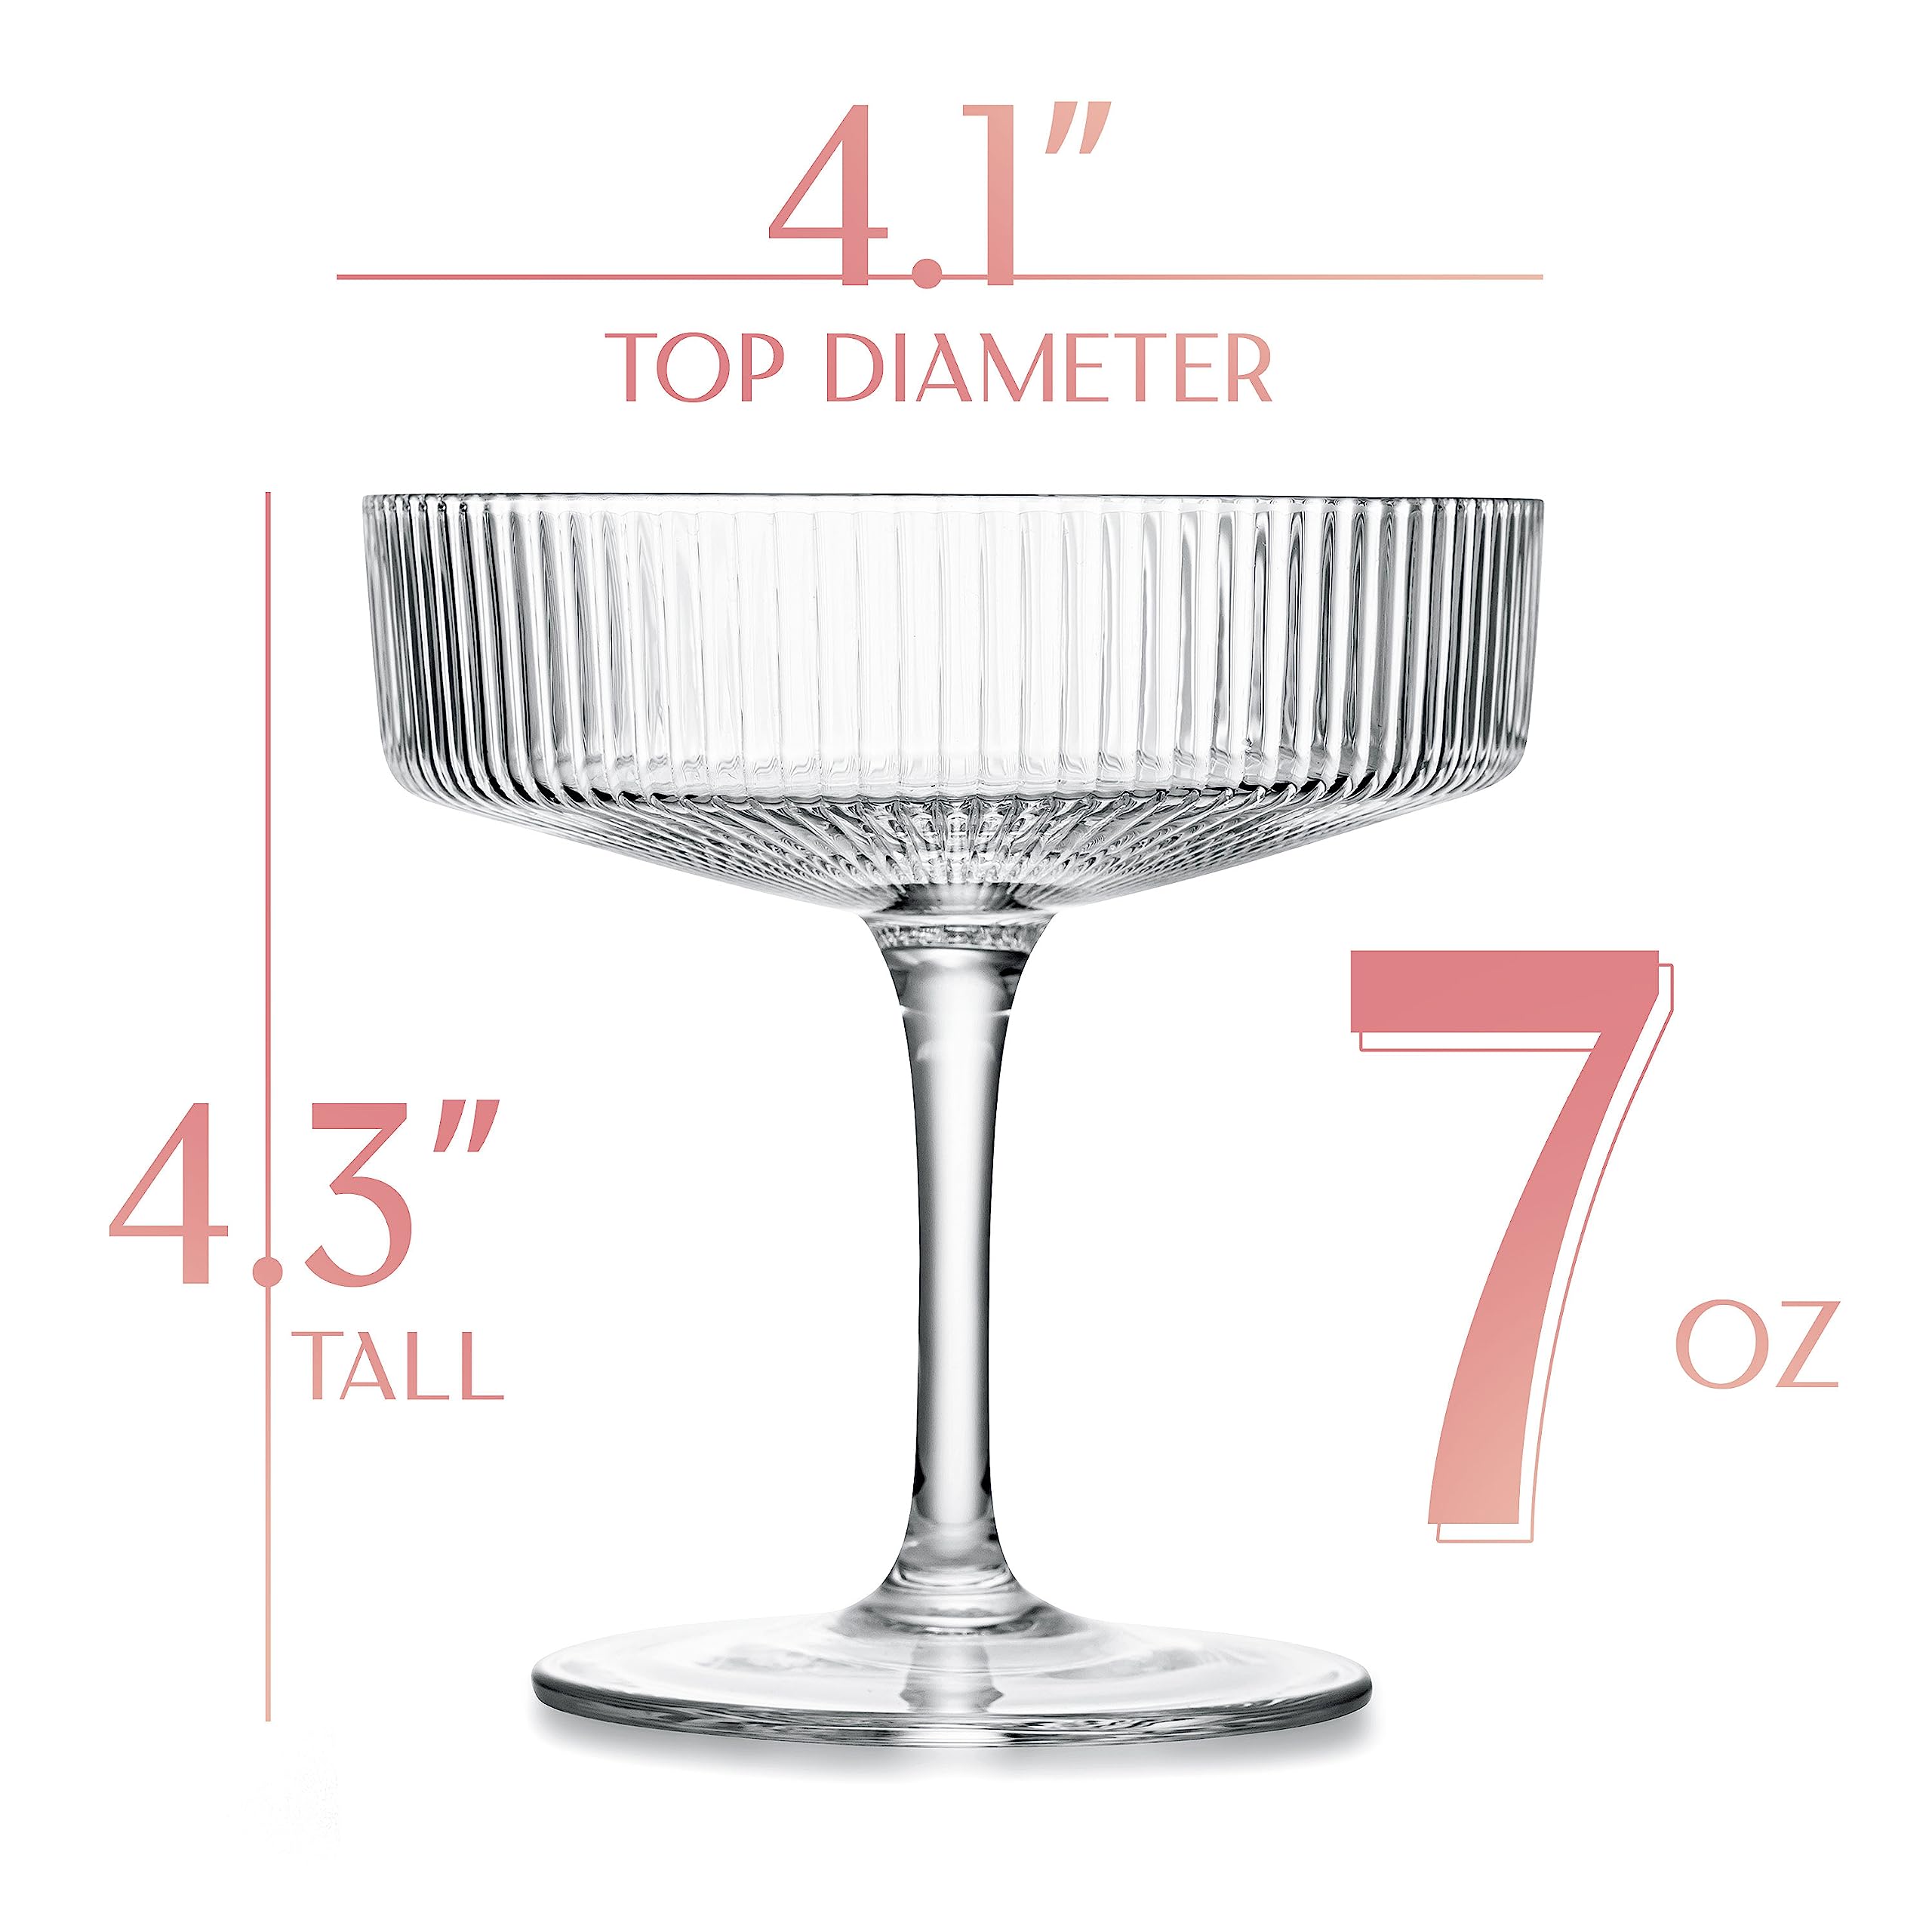 Vintage Art Deco Coupe Glasses | Set of 4 | 7 oz Classic Cocktail Glassware for Champagne, Martini, Manhattan, Cosmopolitan, Sidecar | Crystal Speakeasy Style Saucer Goblets with Stems